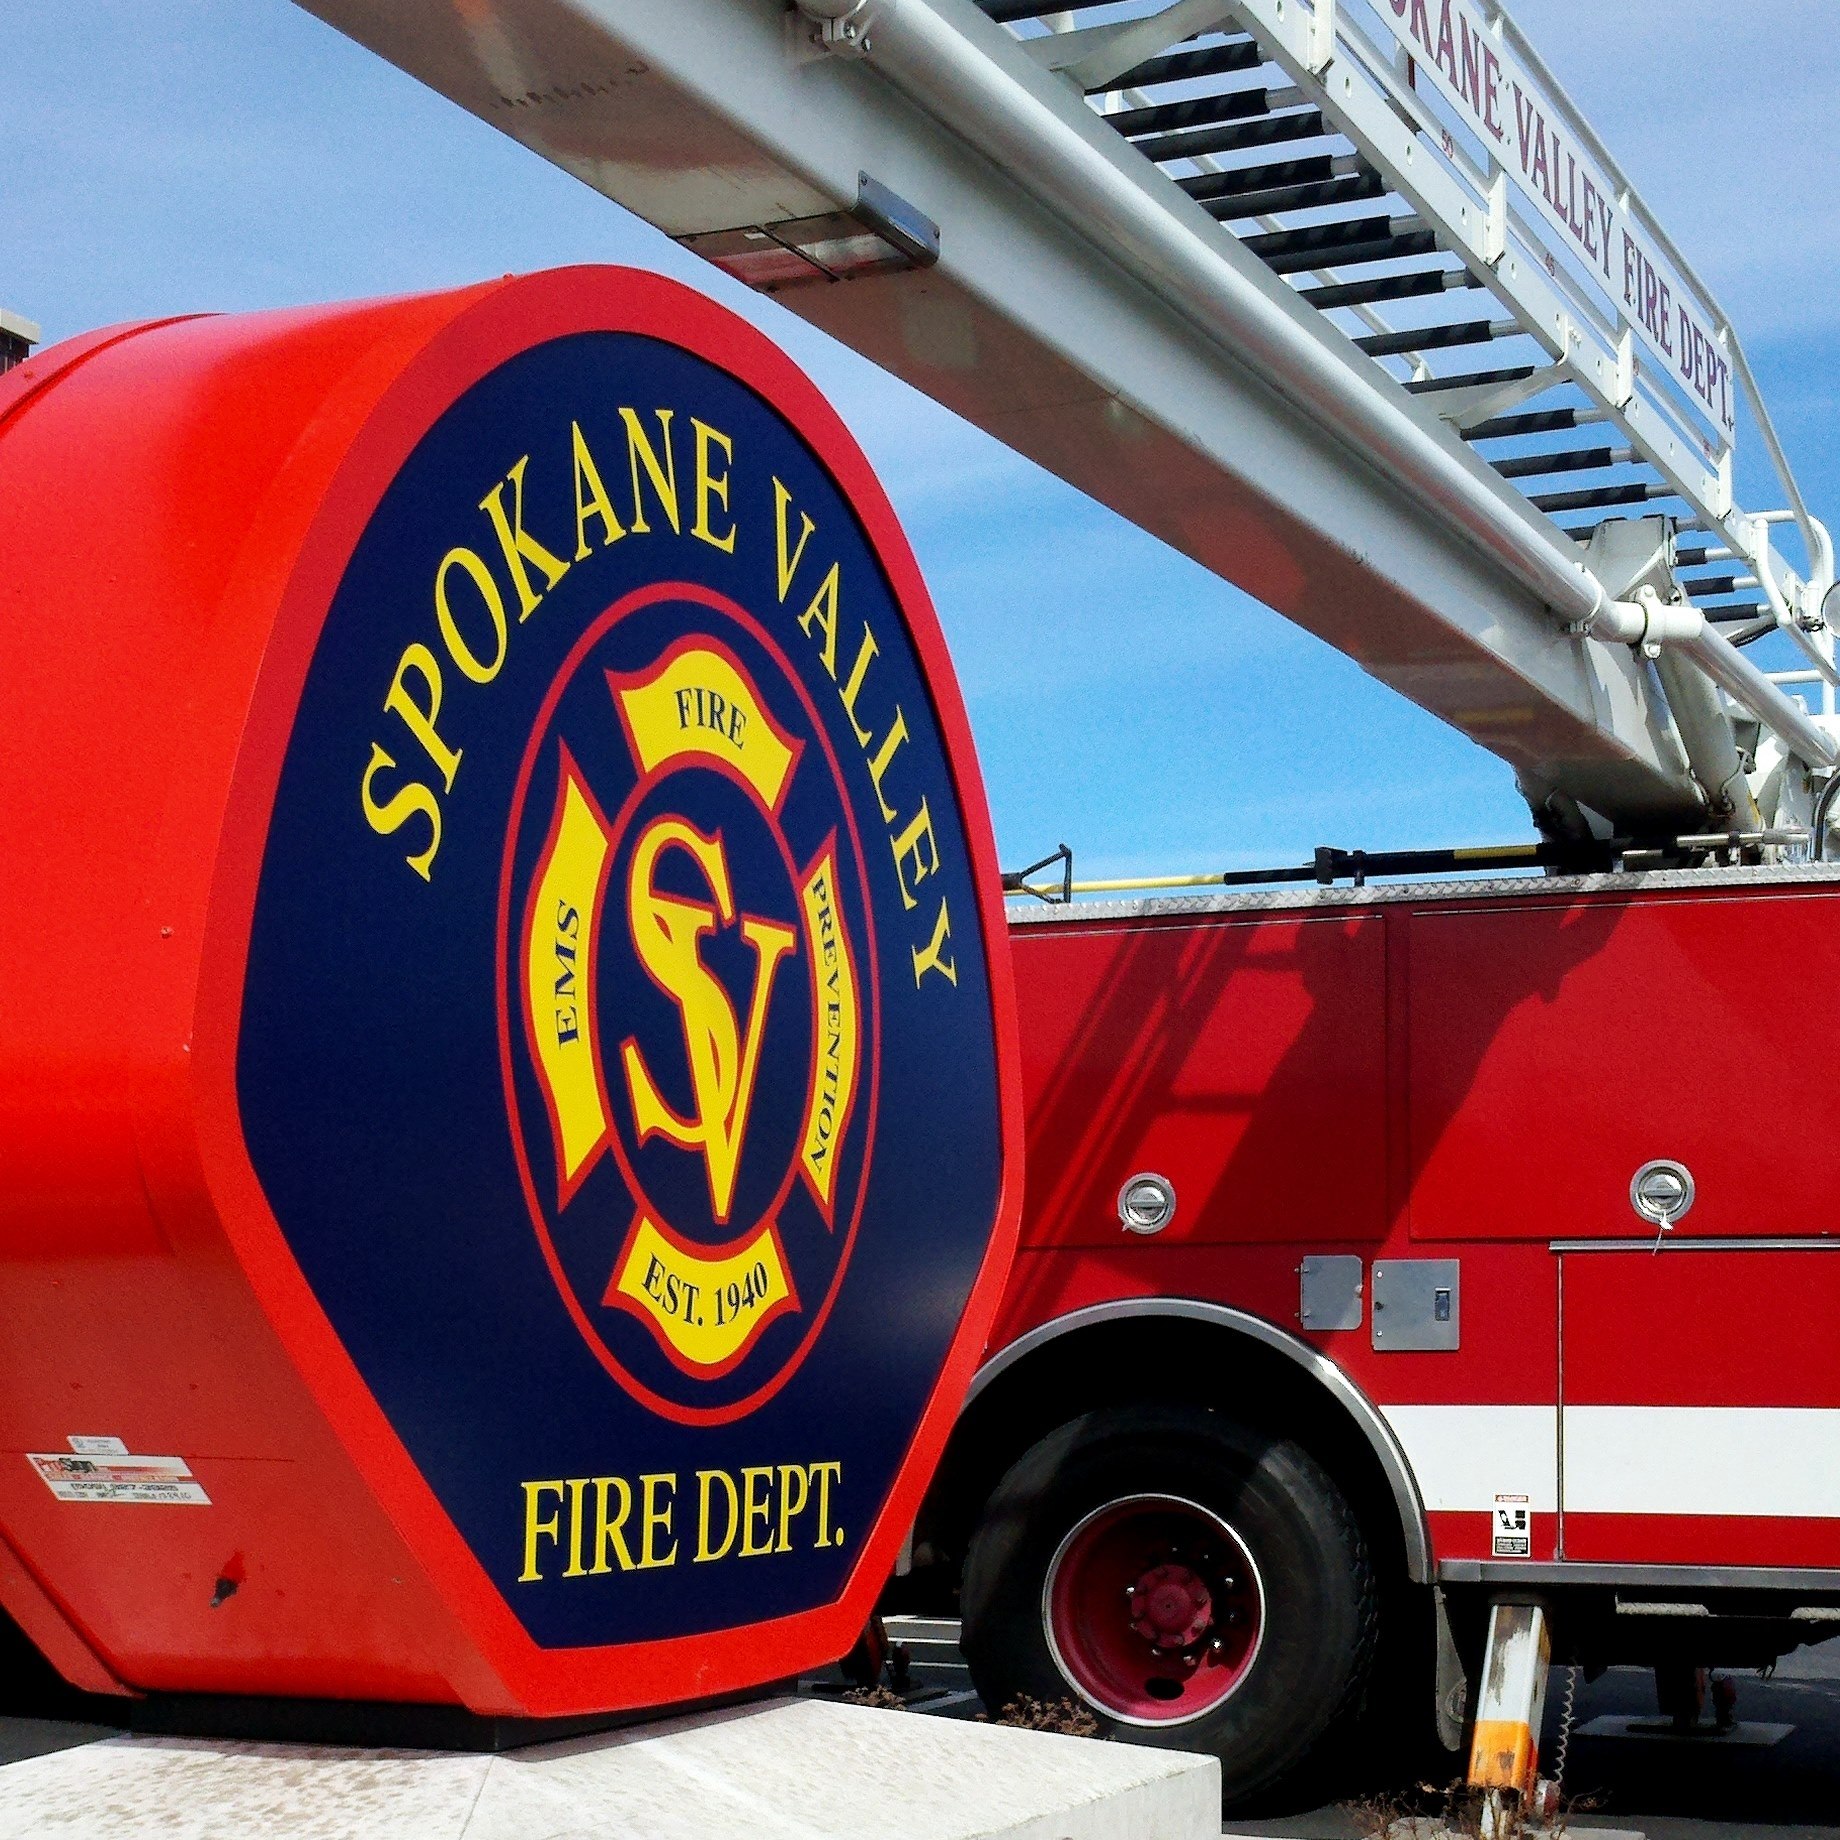 Discover more about our partnership with Spokane Valley Fire Department